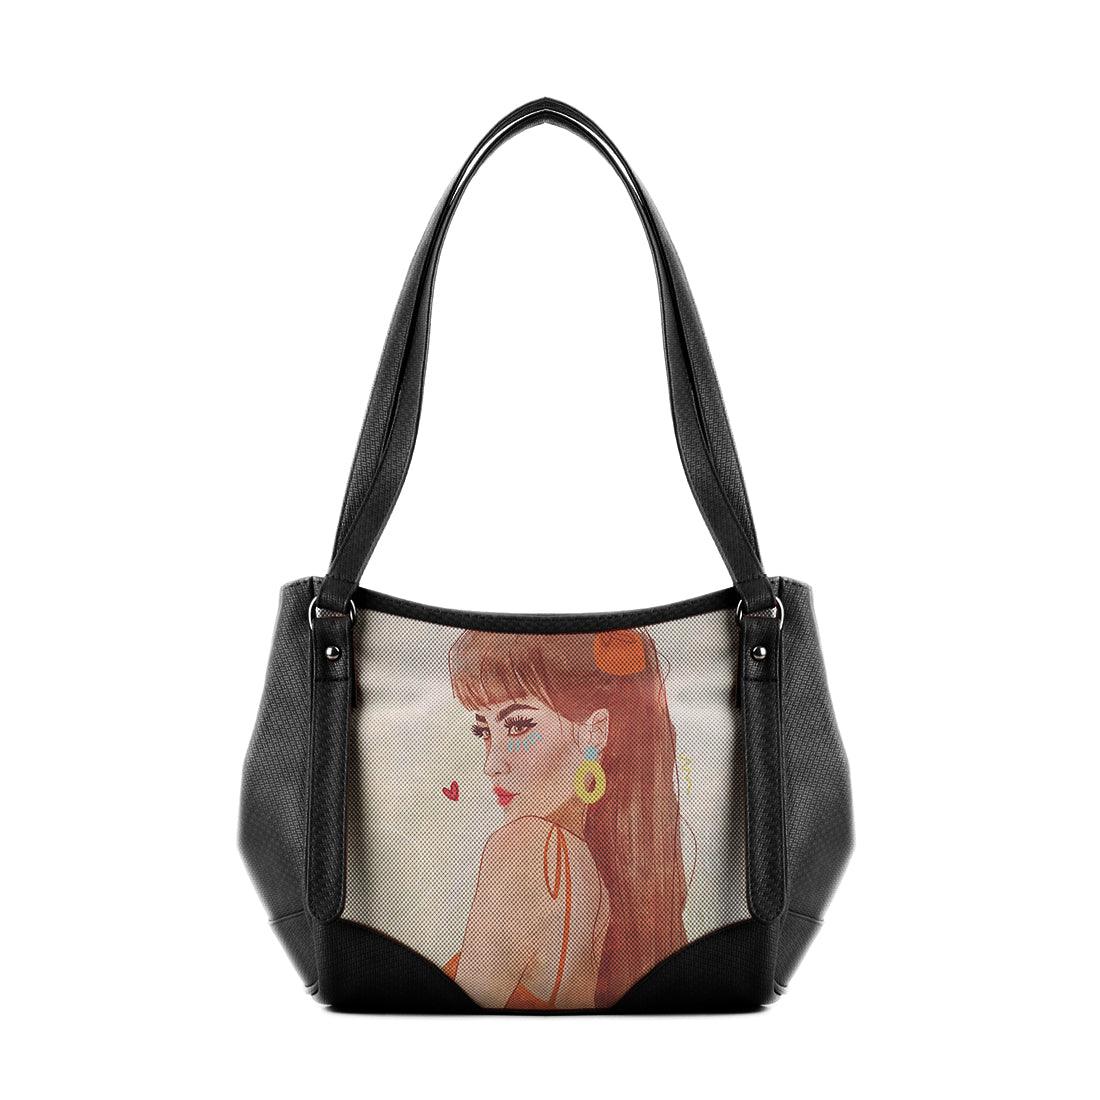 Black Leather Tote Bag Brunette Beauty - CANVAEGYPT